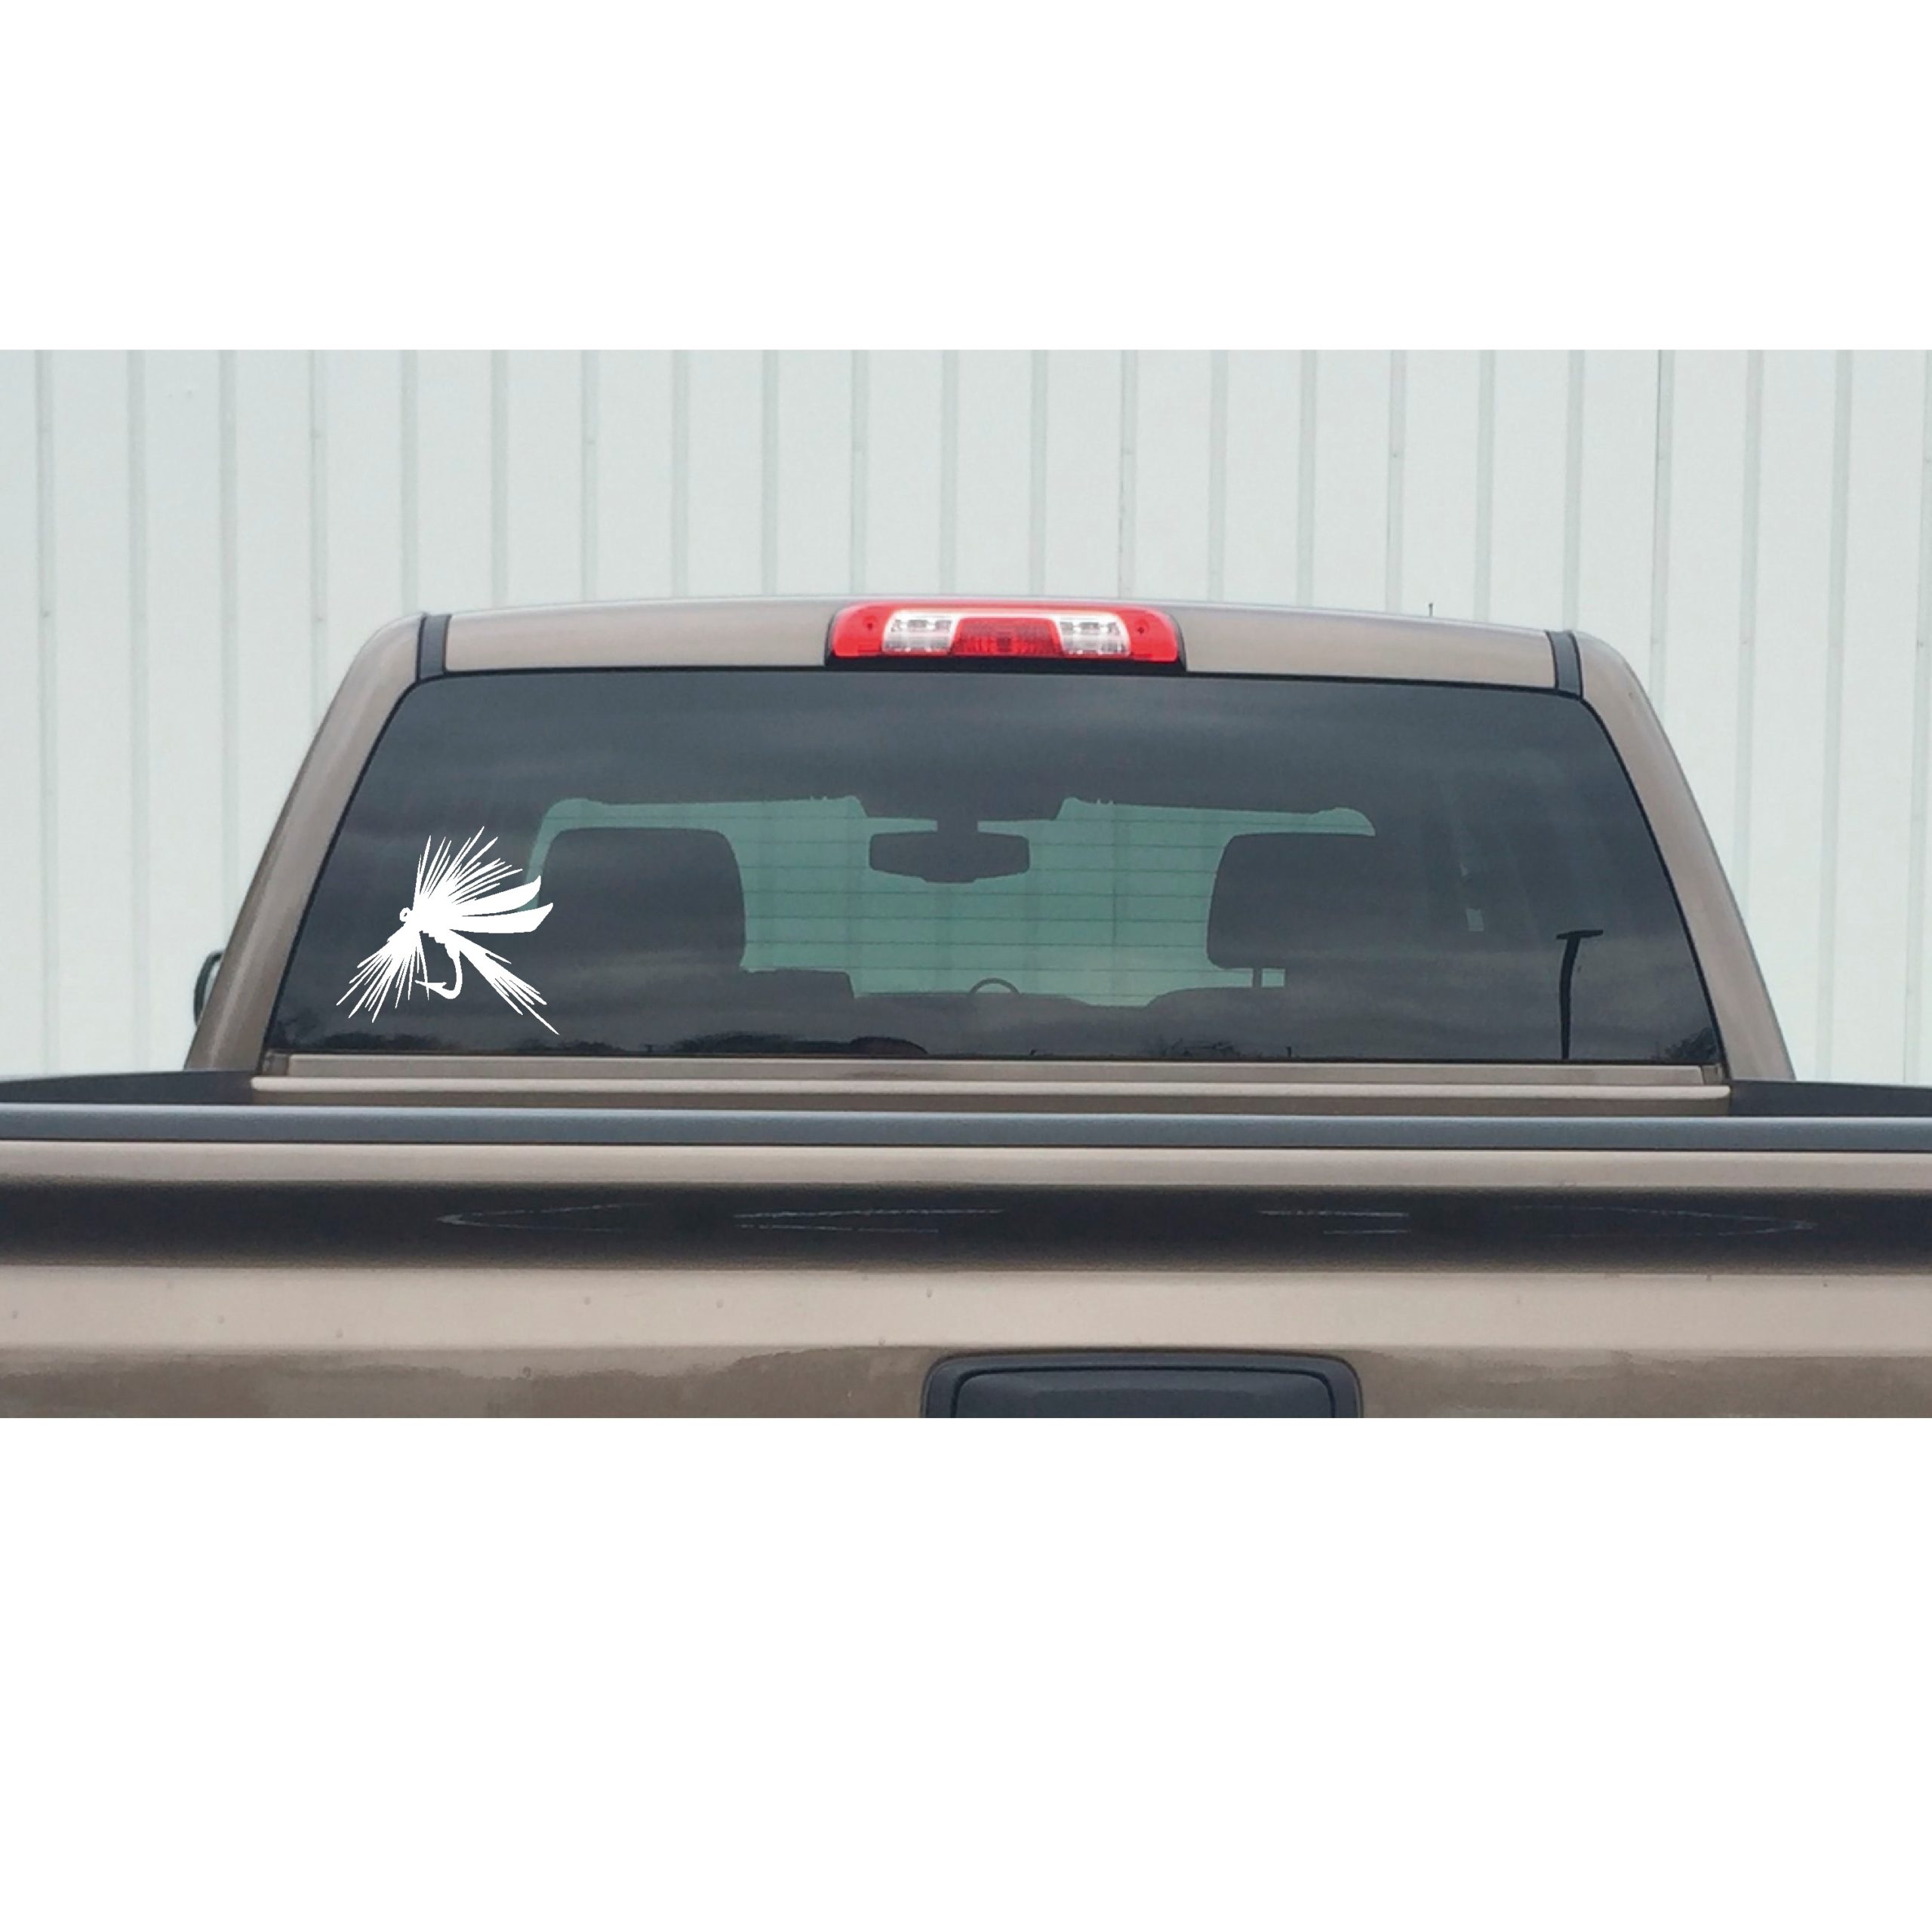 Trout Fly Fish Tackle Lure Fishing Decal - Trout Fly Fish Tackle Lure Decal